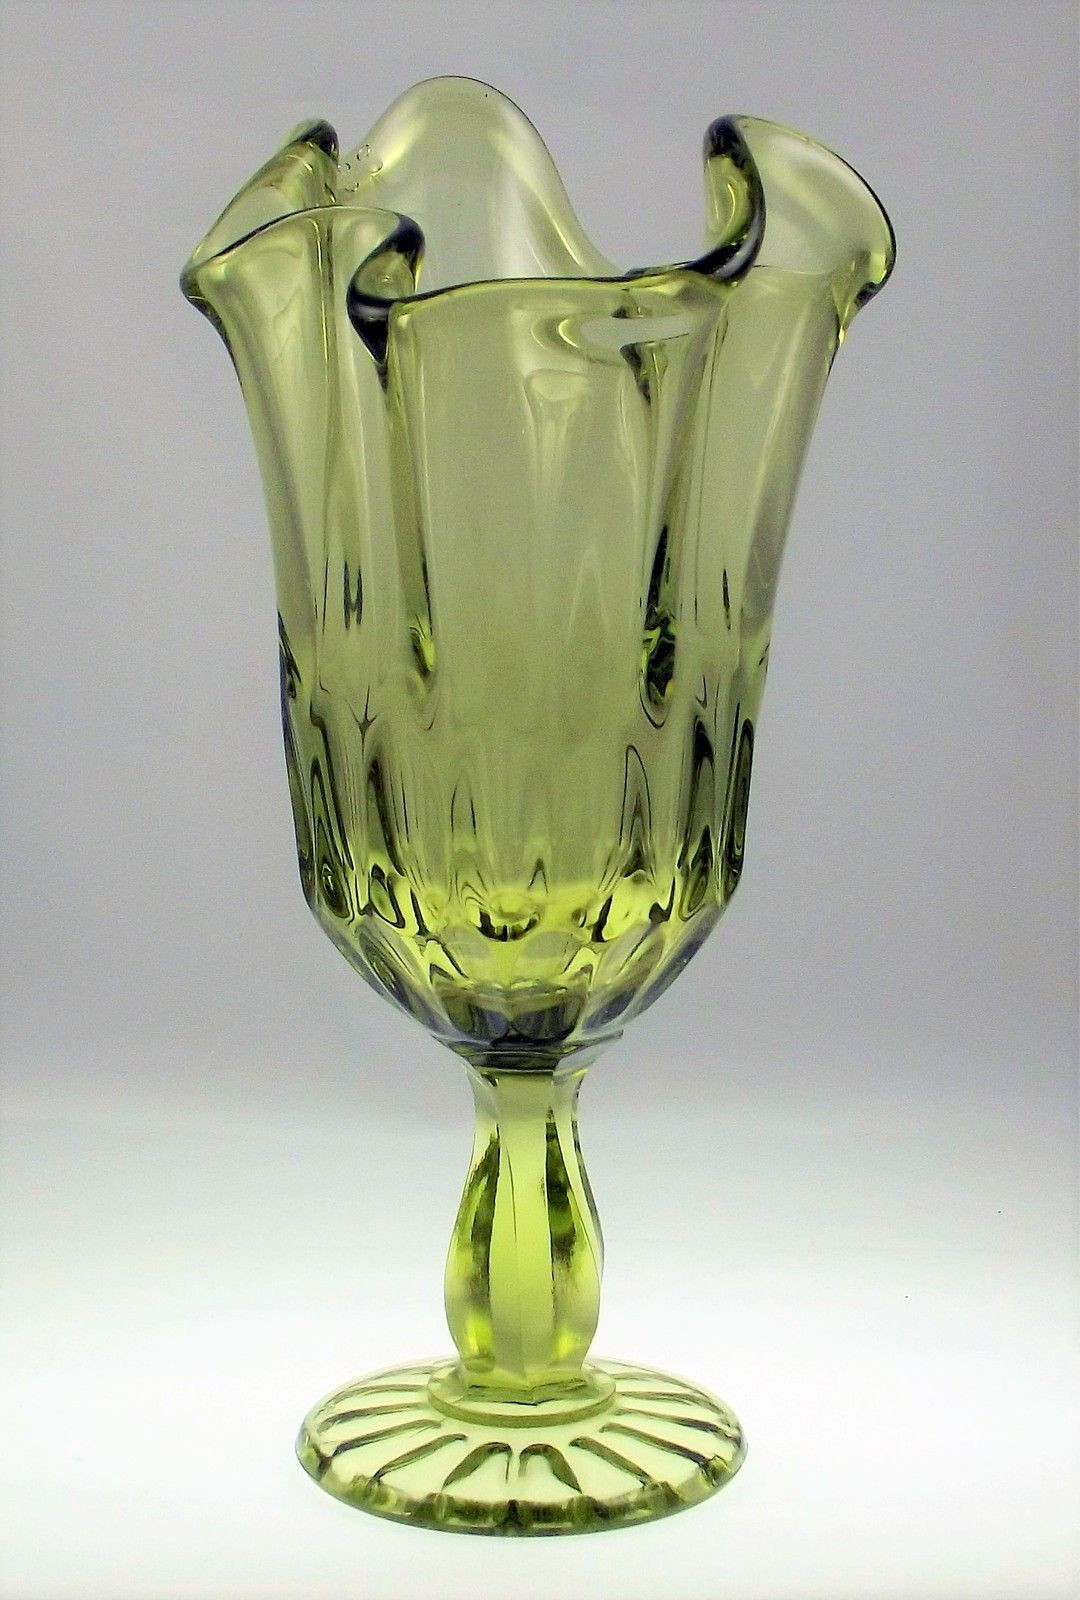 14 Great Clear Glass Rocks for Vases 2024 free download clear glass rocks for vases of vintage fenton art glass colonial green thumbprint footed vase 4459 pertaining to vintage fenton art glass colonial green thumbprint footed vase 4459 cg